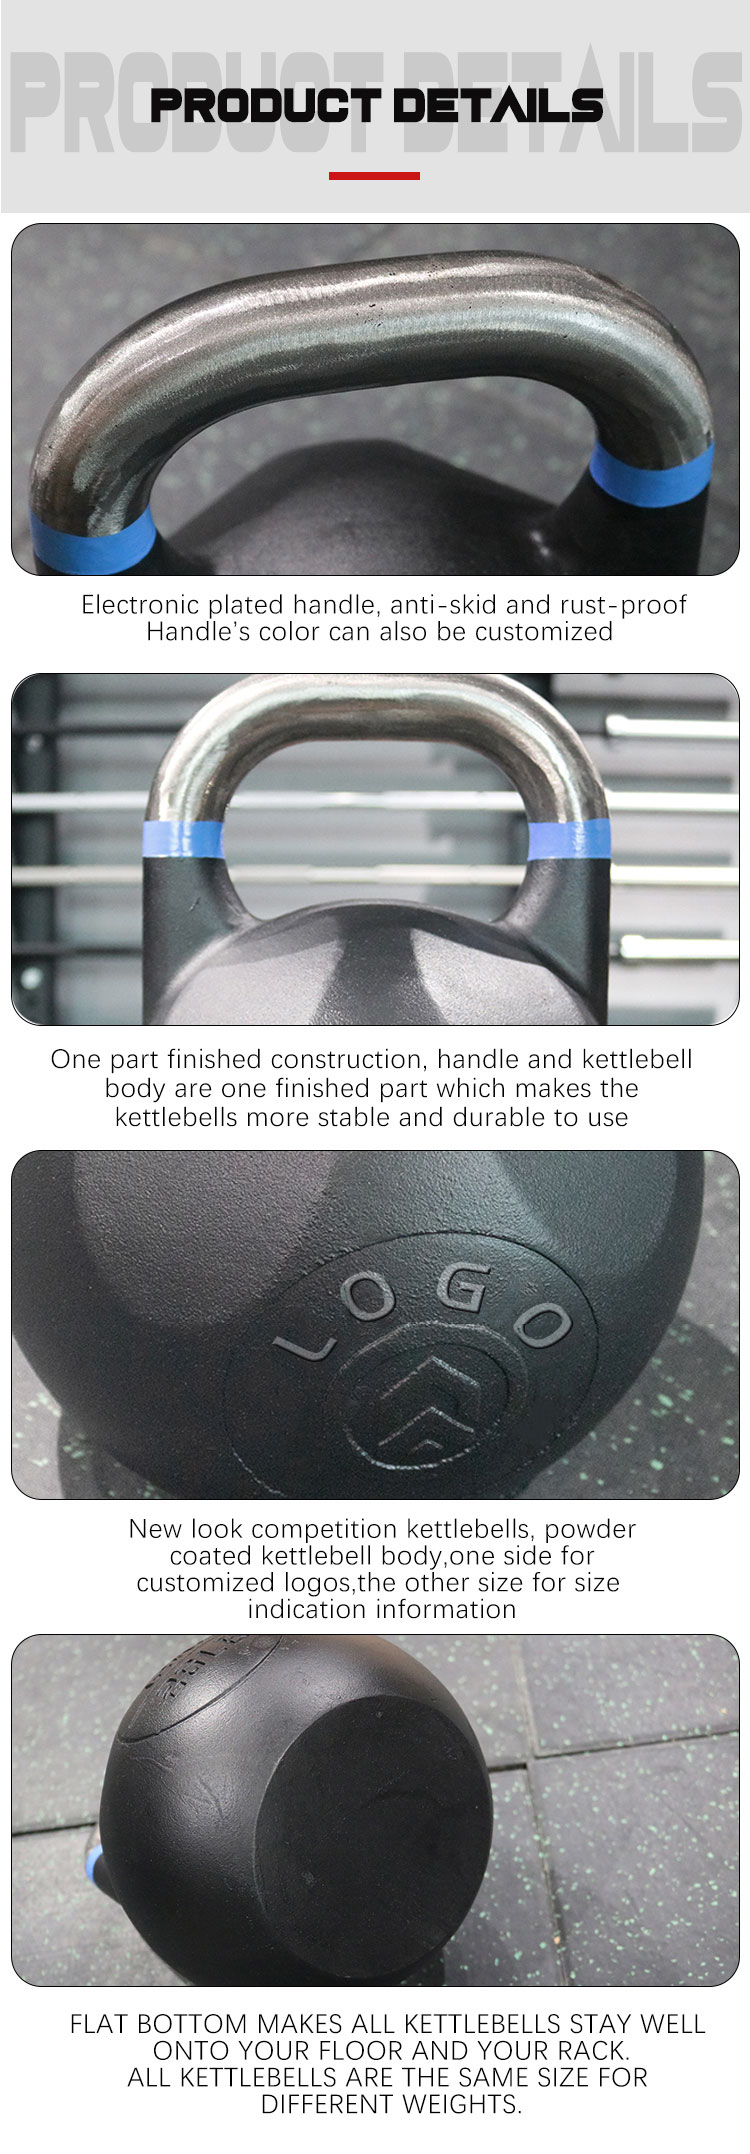 competition kettlebell-img2